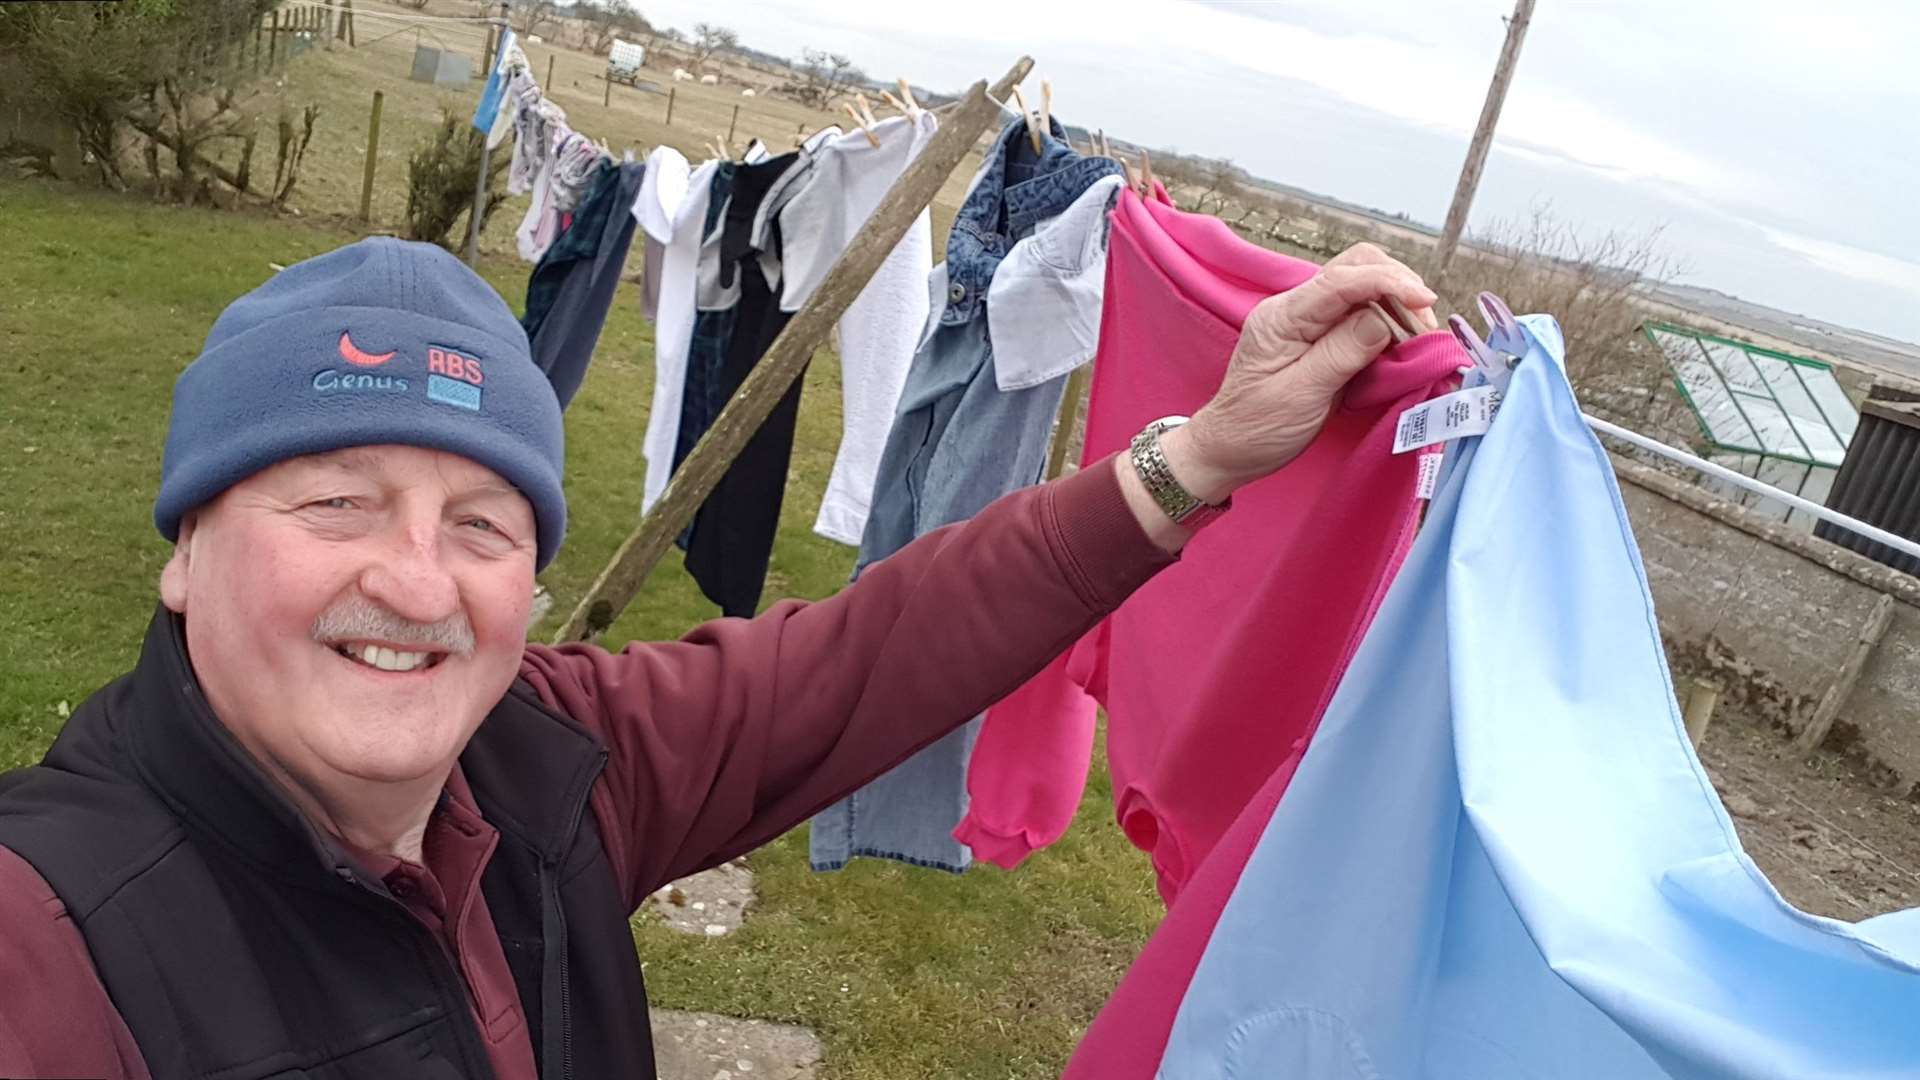 With community events cancelled, civic leader Willie Mackay is finding time to hang out the washing.